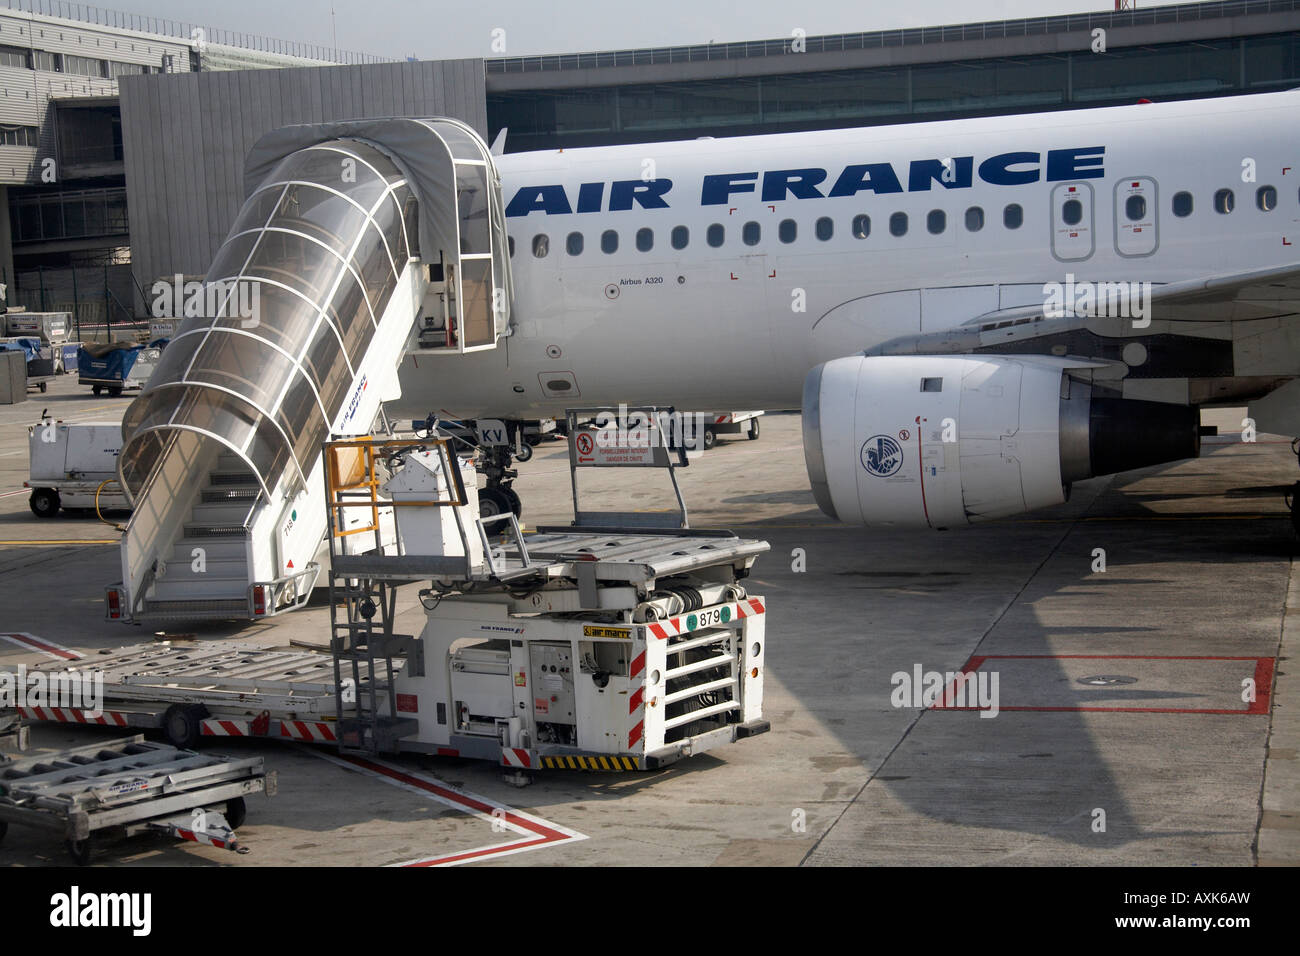 Air France Airbus A320 aircraft with ground servicing at Charles De Gaulle International Airport Paris France Stock Photo